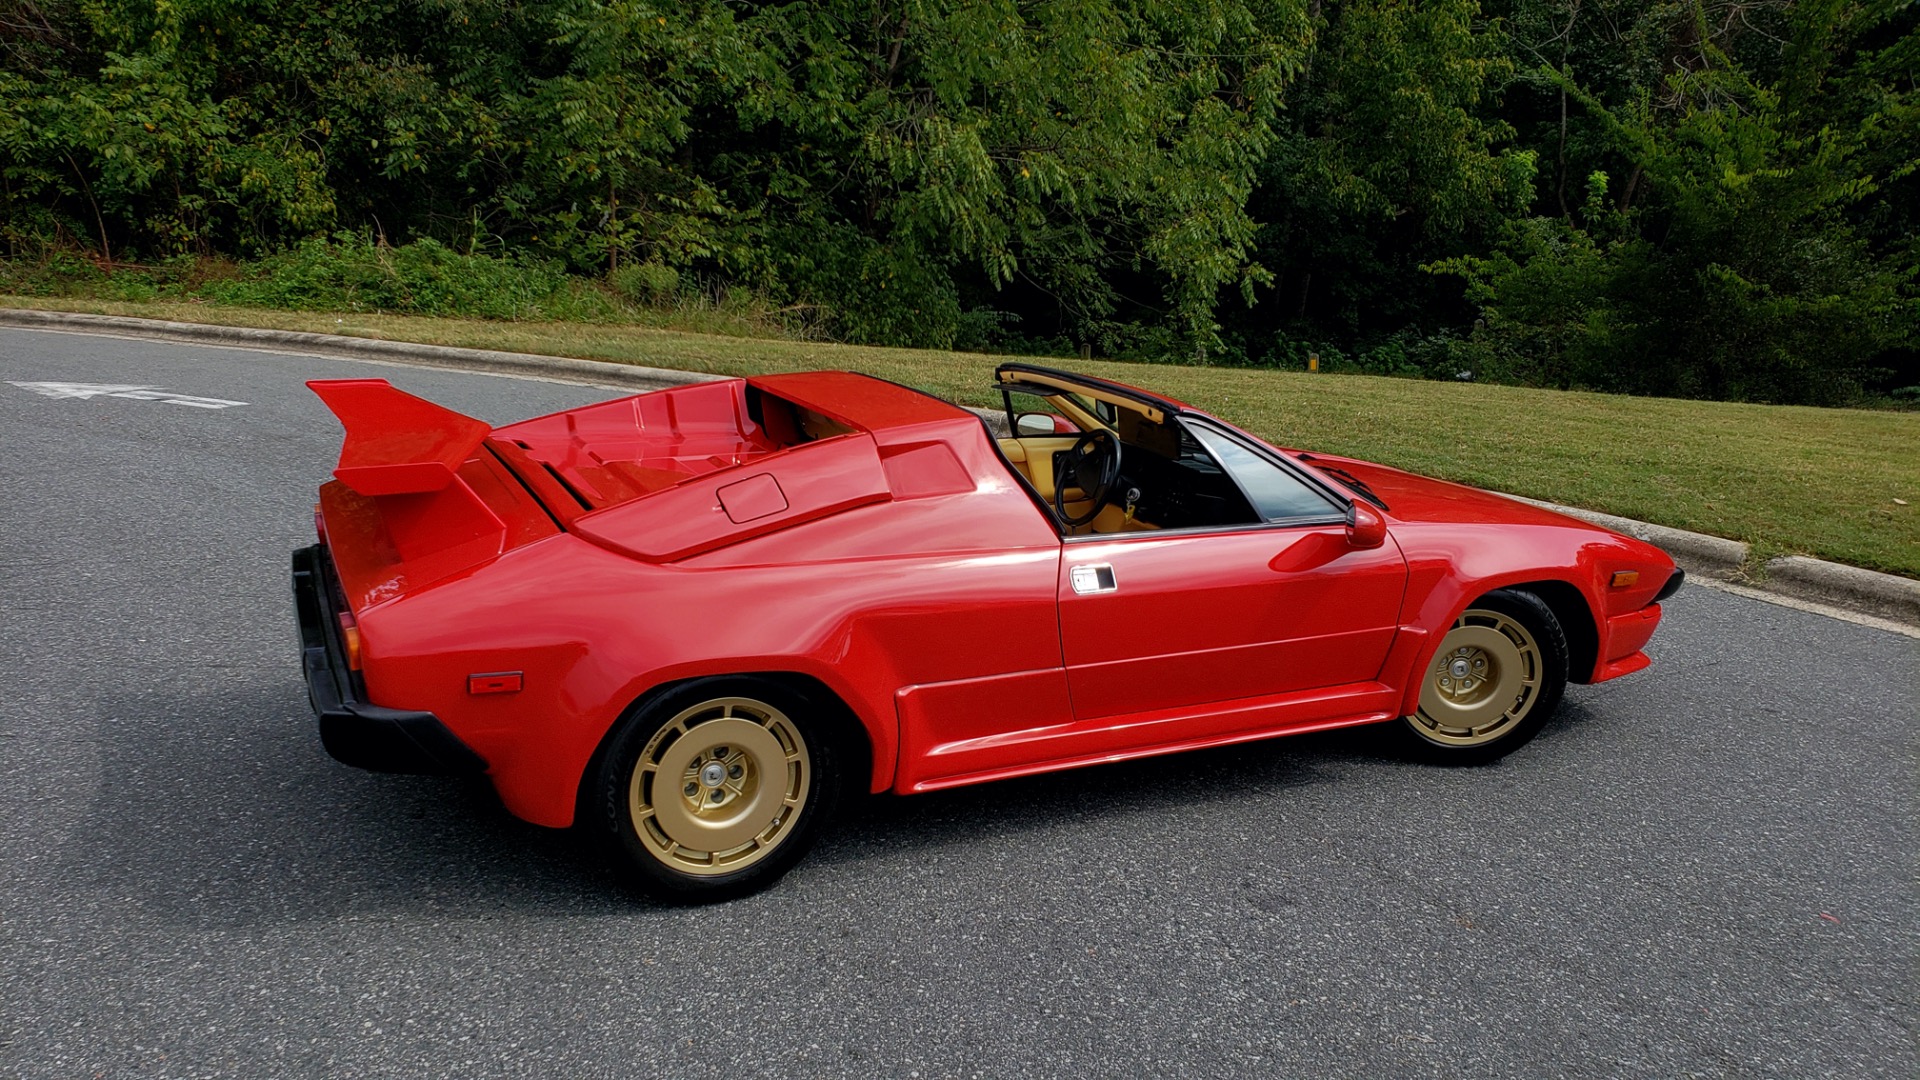 Used 1988 Lamborghini JALPA 3.5 / 5-SPD MANUAL / LOW MILES / EXCELLENT CONDITION for sale Sold at Formula Imports in Charlotte NC 28227 28